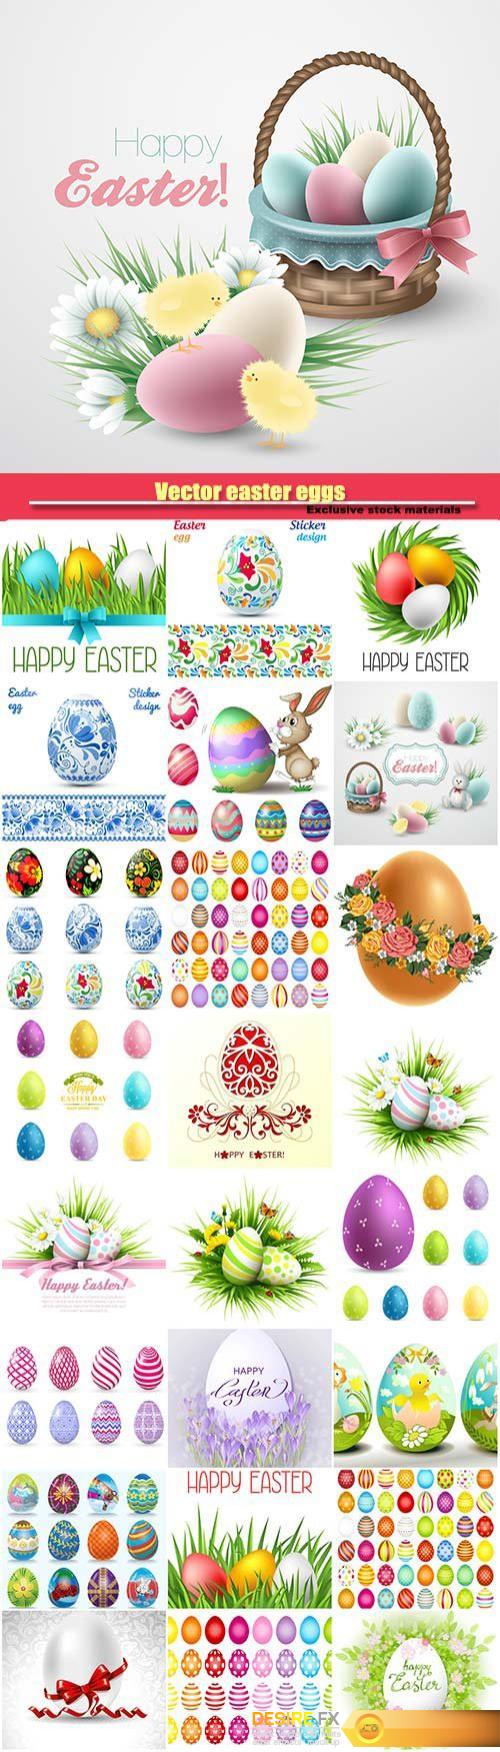 Vector easter eggs, happy easter holiday vector backgrounds